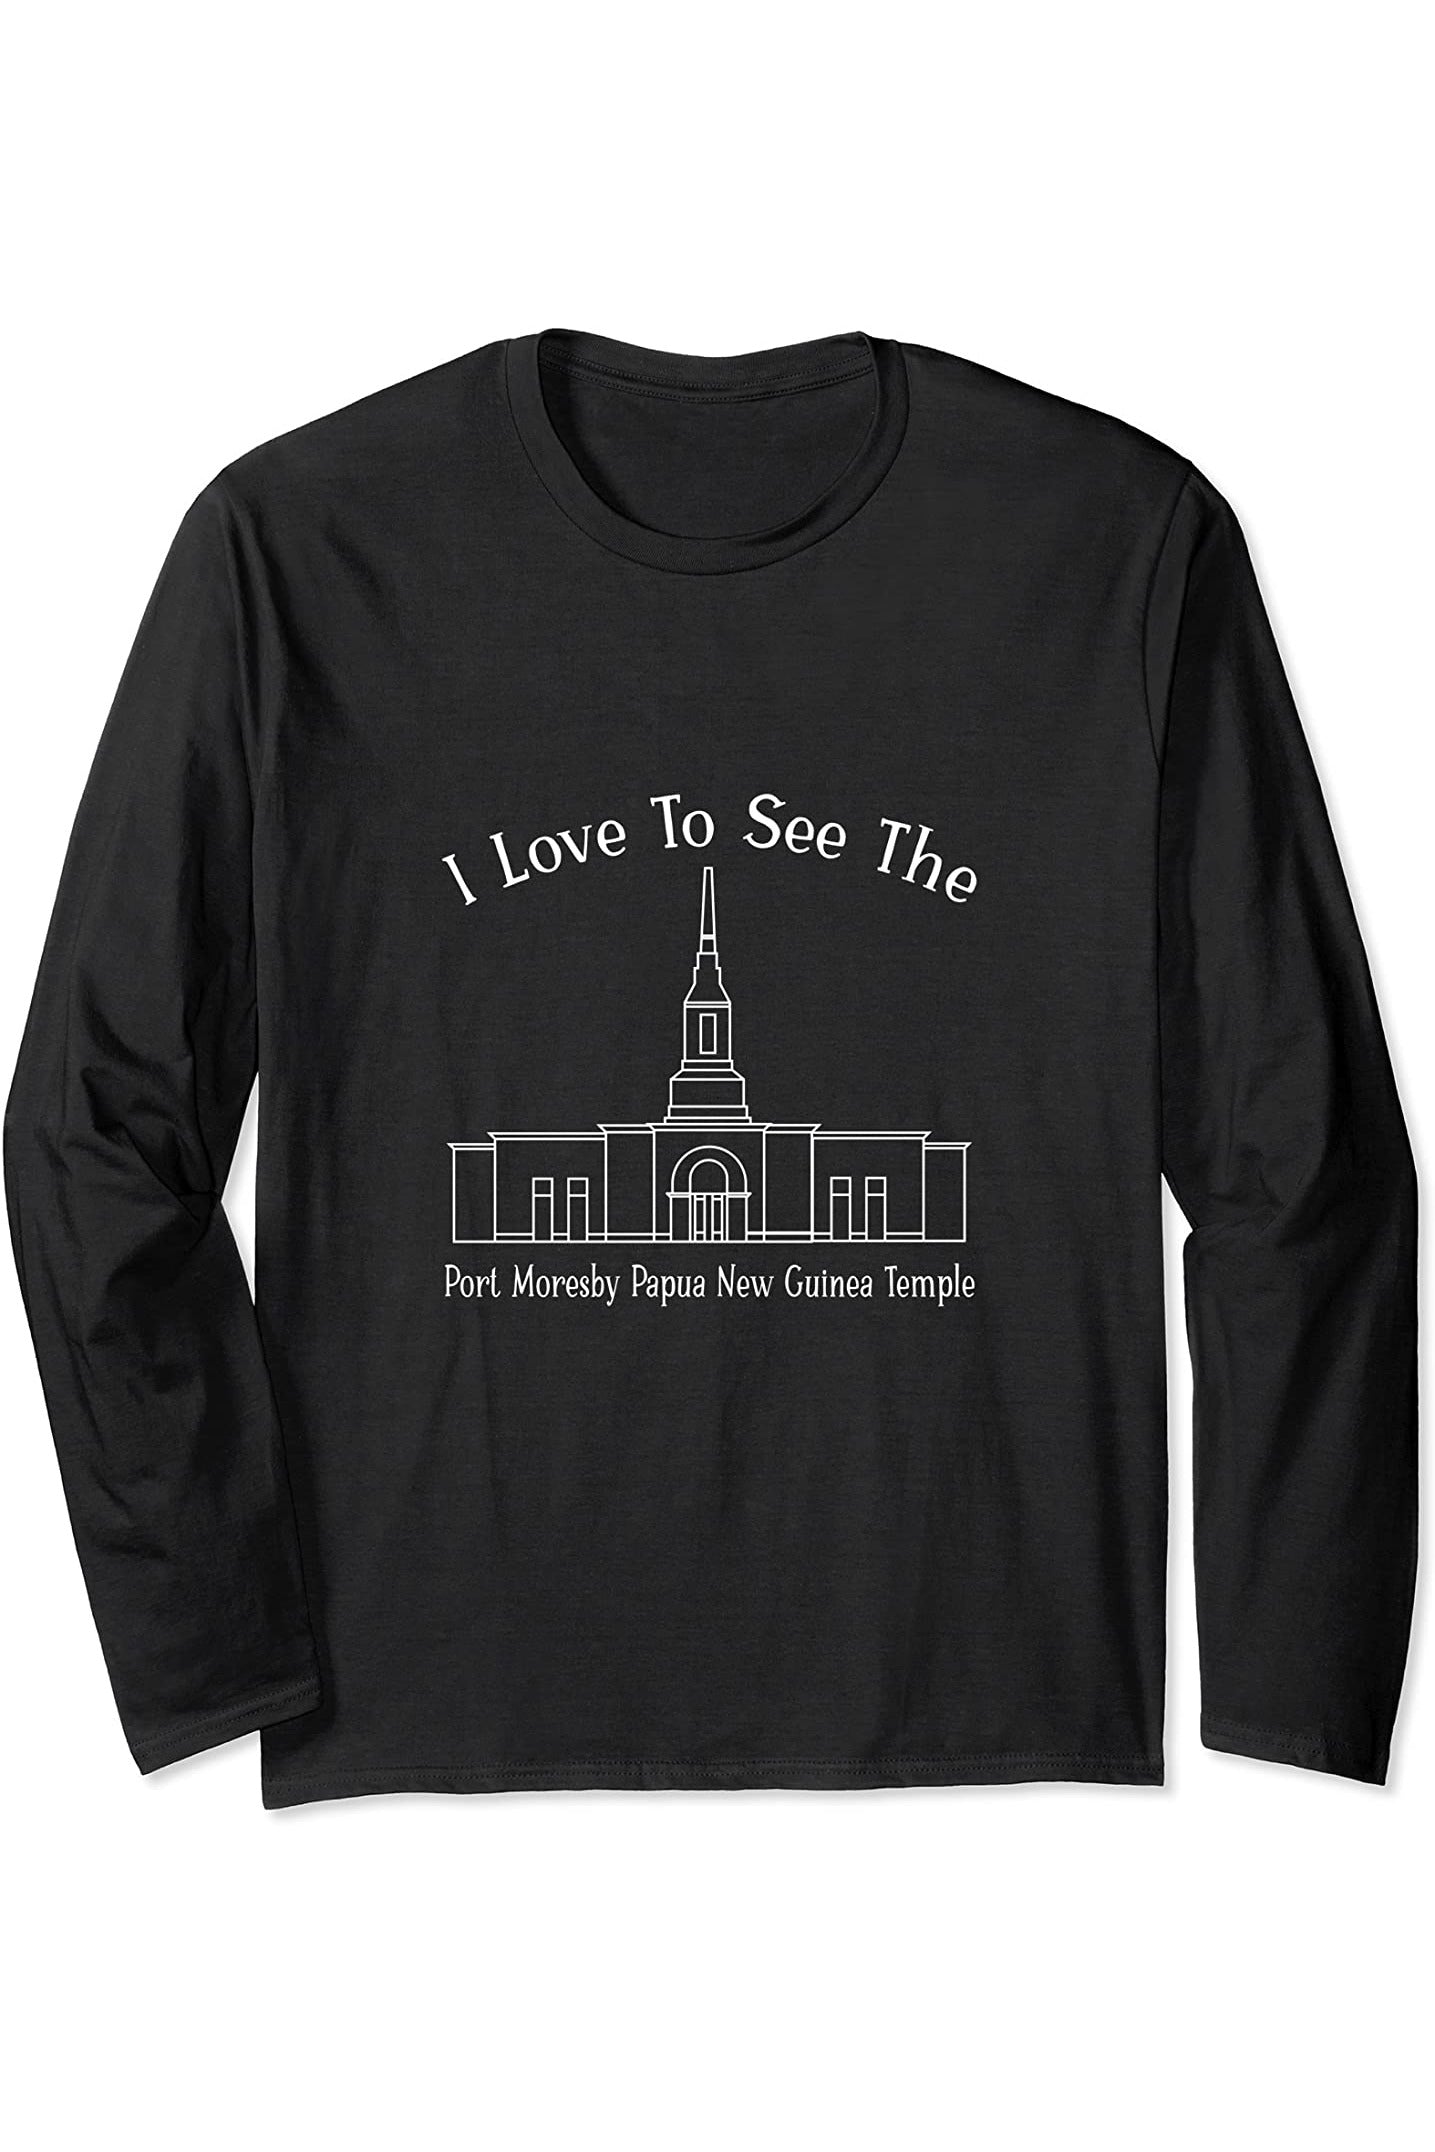 Port Moresby Papua New Guinea Temple Long Sleeve T-Shirt - Happy Style (English) US